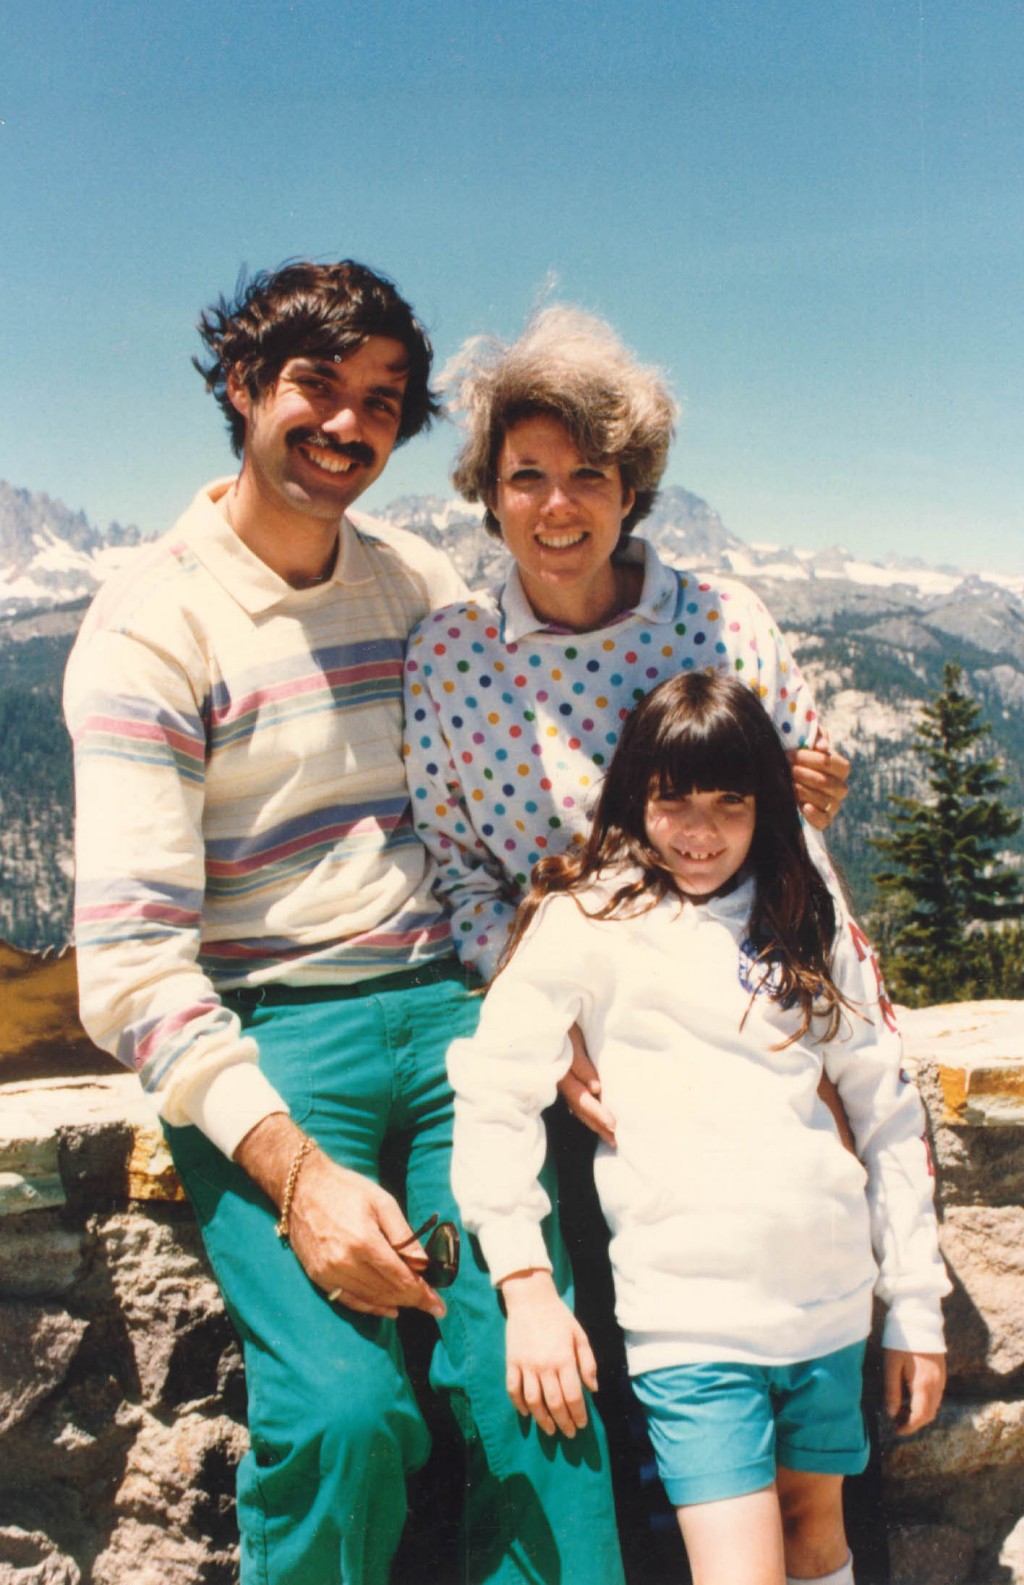 Blanka's daughter Shelly, son-in-law, and granddaughter Alexis Danielle on vacation. [LCID: roth17]